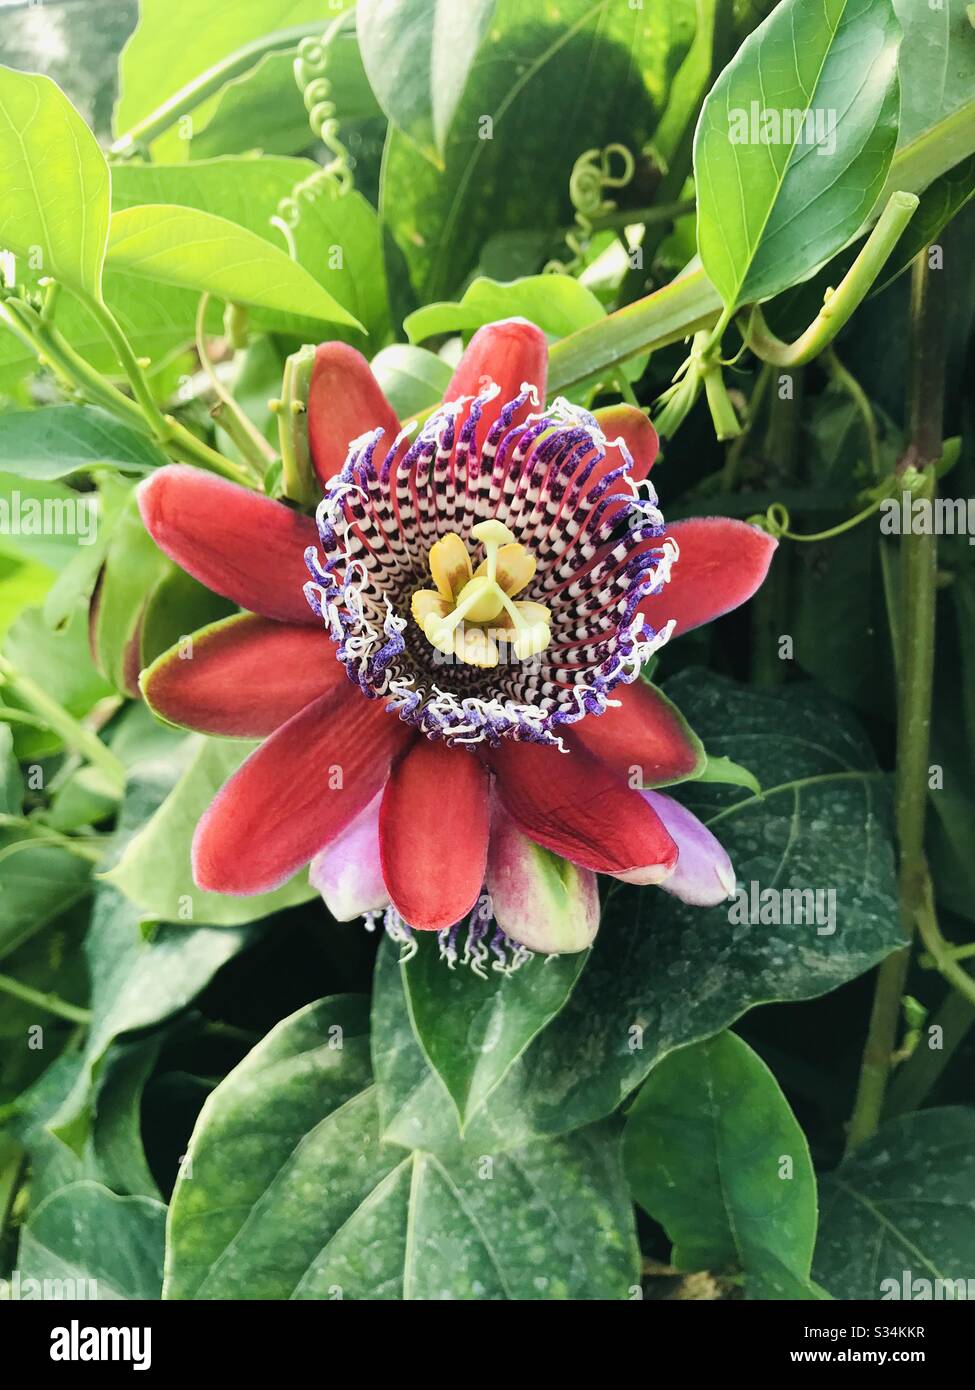 Passion flower in full bloom. It also known to represent the the five wounds of Jesus Christ. It has a haunting scent that was used in then perfume of Elizabeth Taylor’s passion. Stock Photo